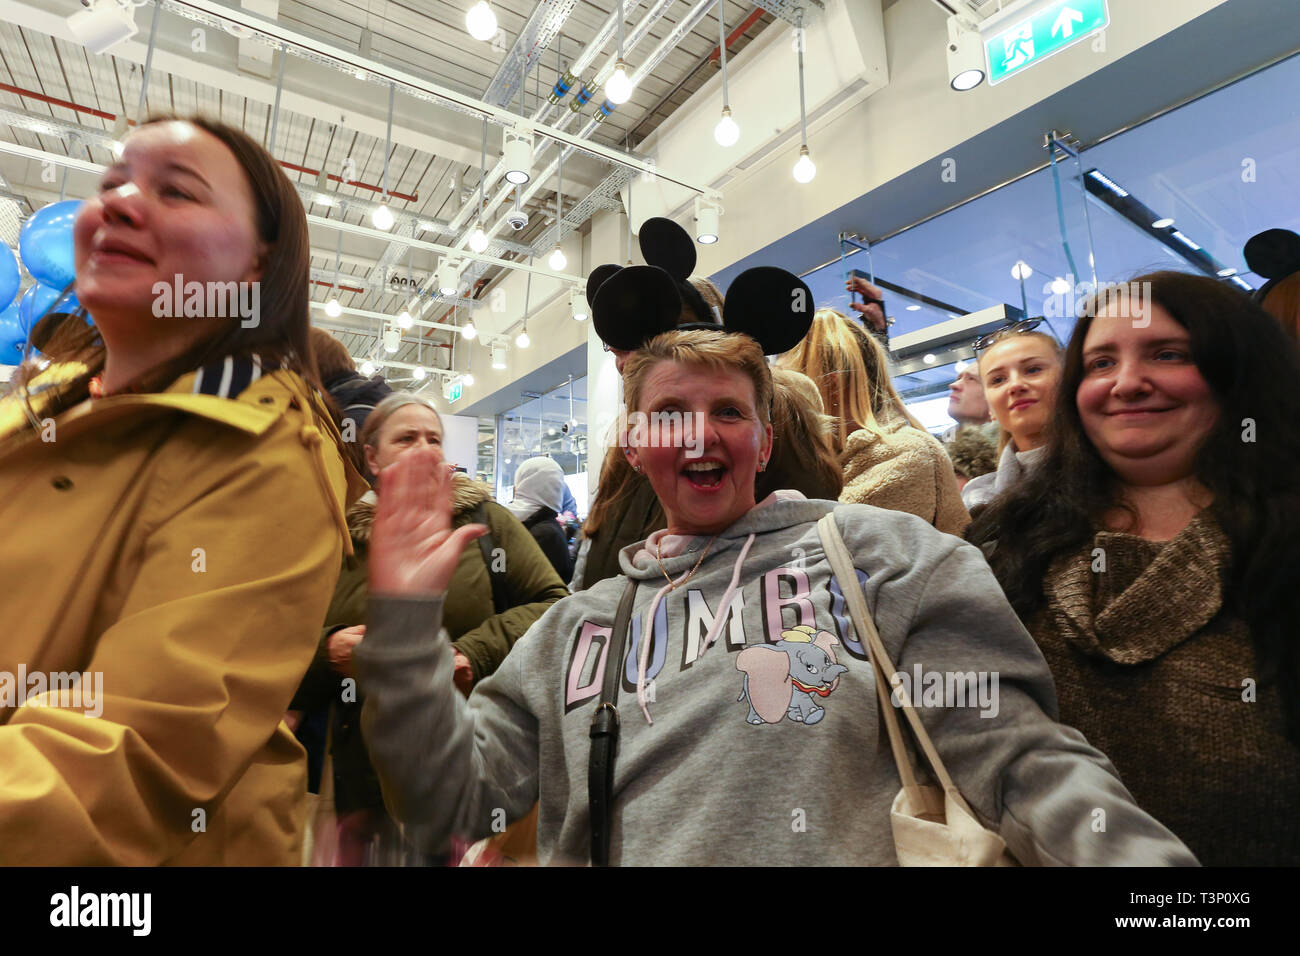 Birmingham, UK. 11th April,2019. The world's biggest Primark store opens today in Birmingham. Hundreds of customers crowd in the entry as the doors open for the first time. Peter Lopeman/Alamy Live News Stock Photo